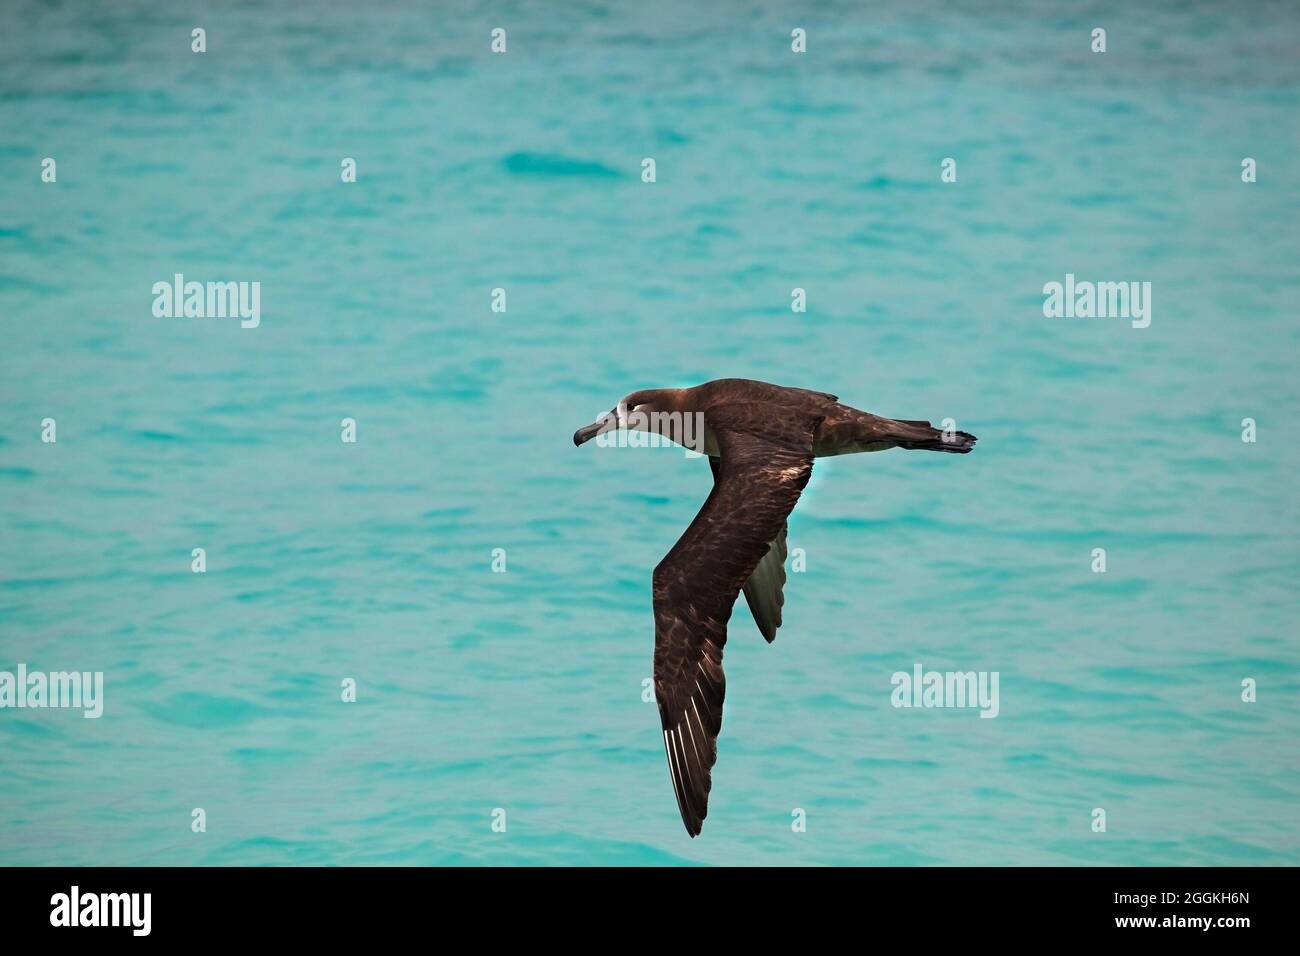 Black-footed albatross flying over aquamarine water of Midway Atoll lagoon in the North Pacific Ocean. Phoebastria nigripes Stock Photo